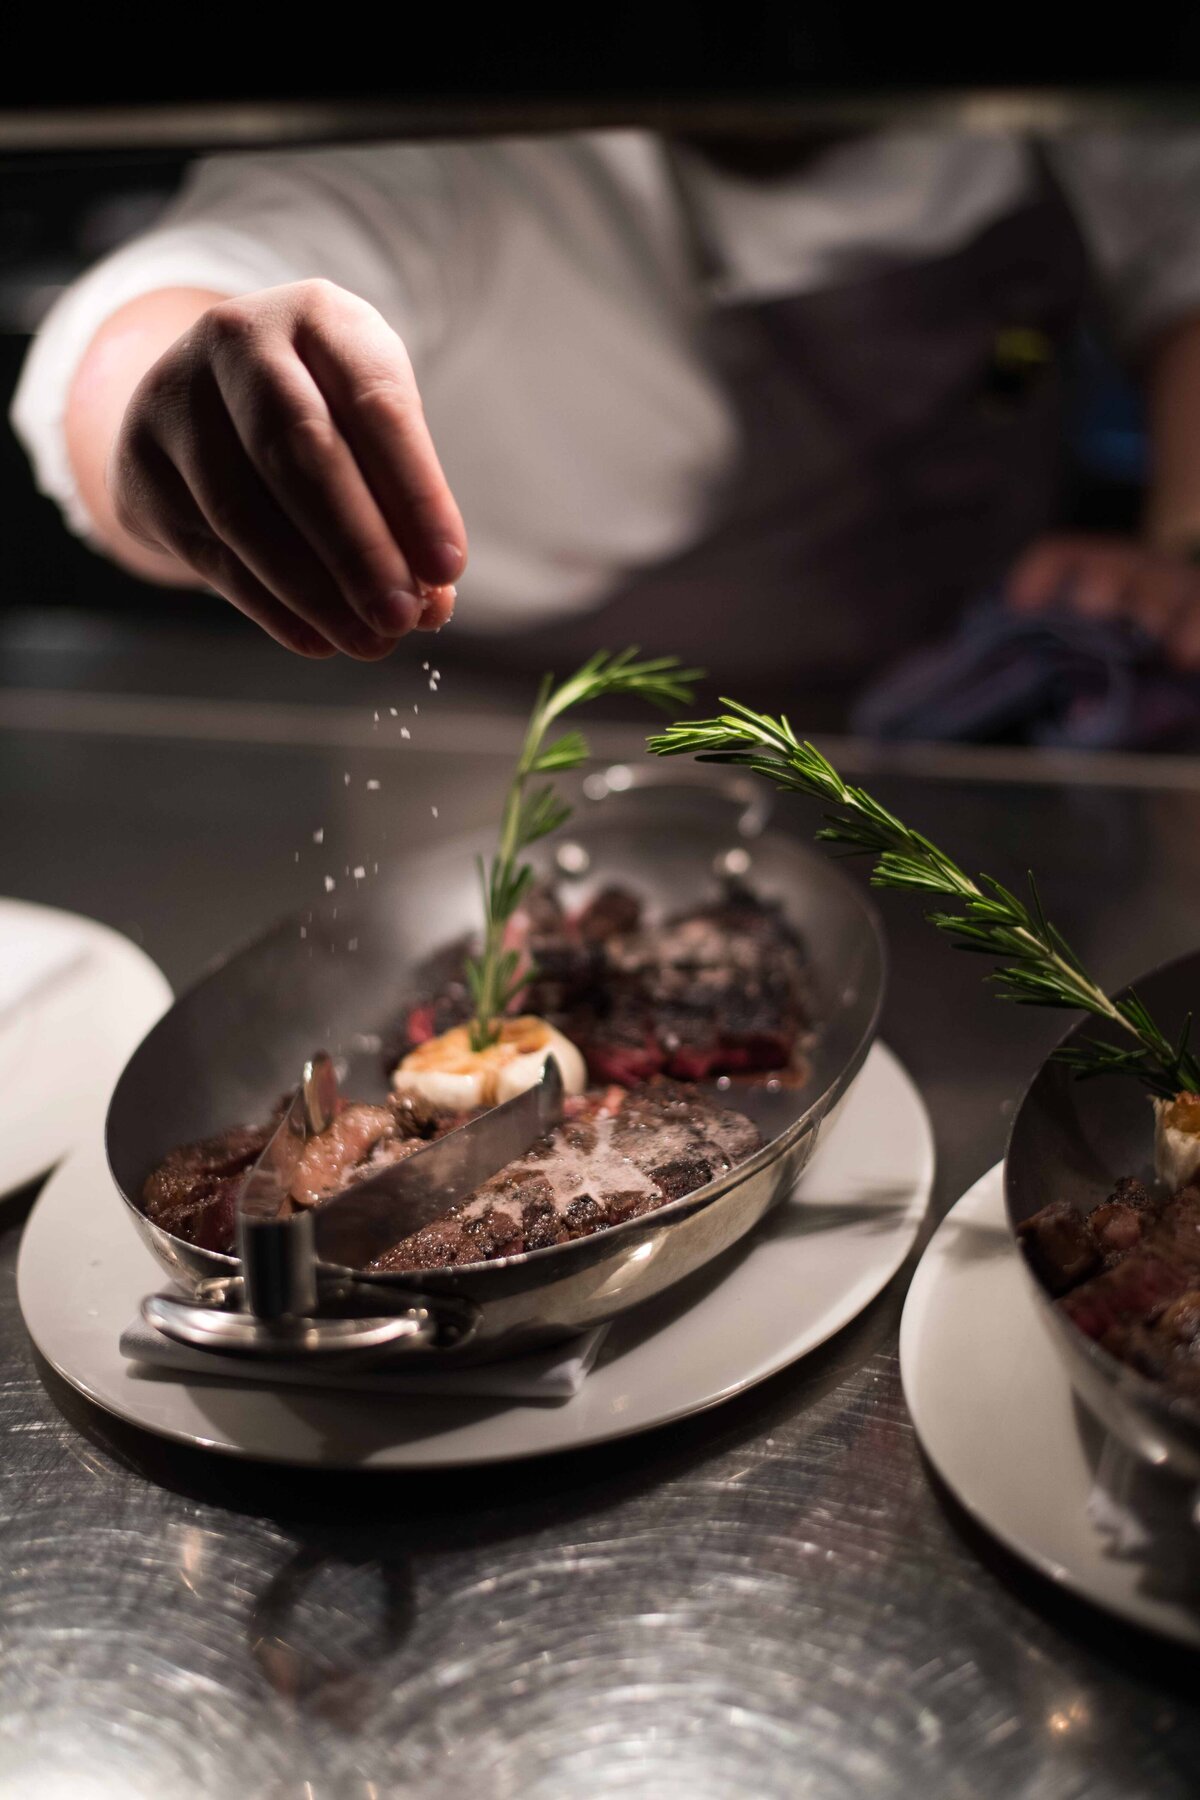 A Chef's hand sprinkles salt on a plated steak with a sprig of rosemary. Shot for a restaruant